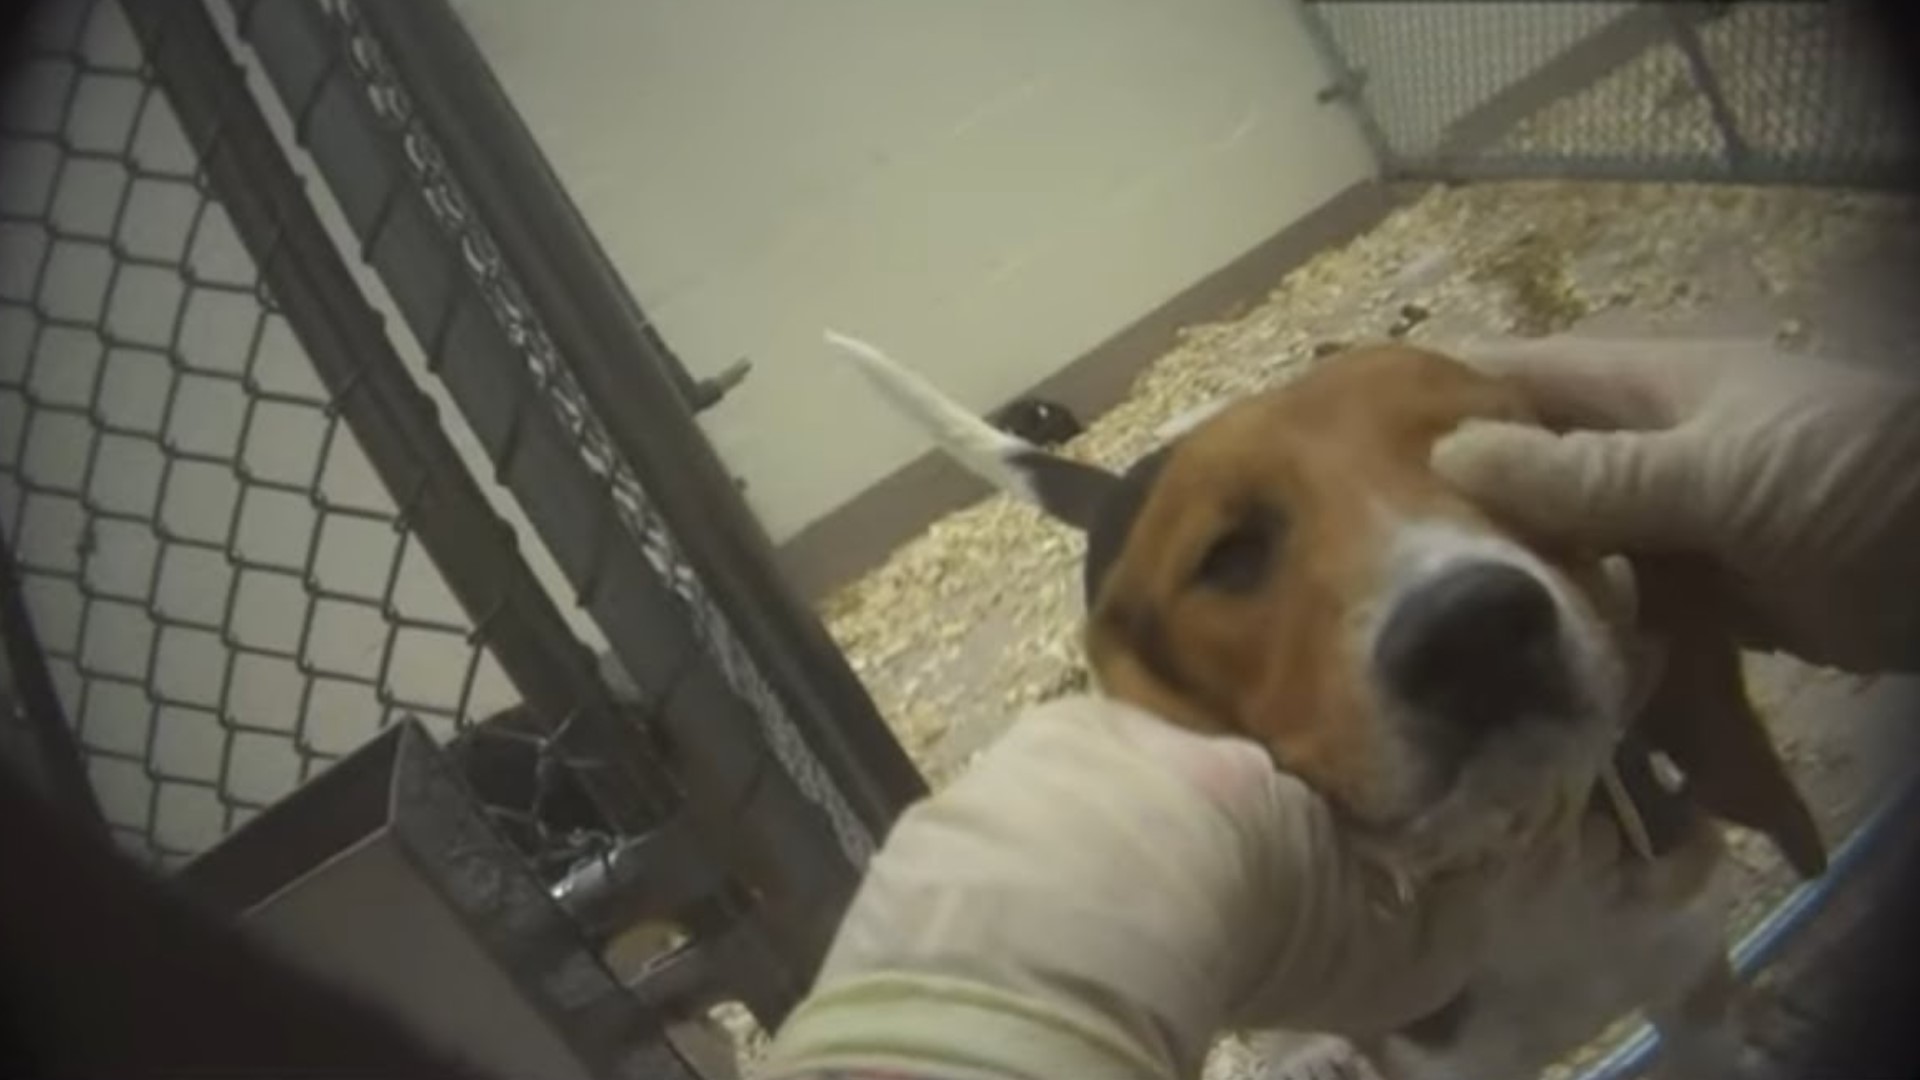 Hidden camera video from Humane Society investigator shows tests 